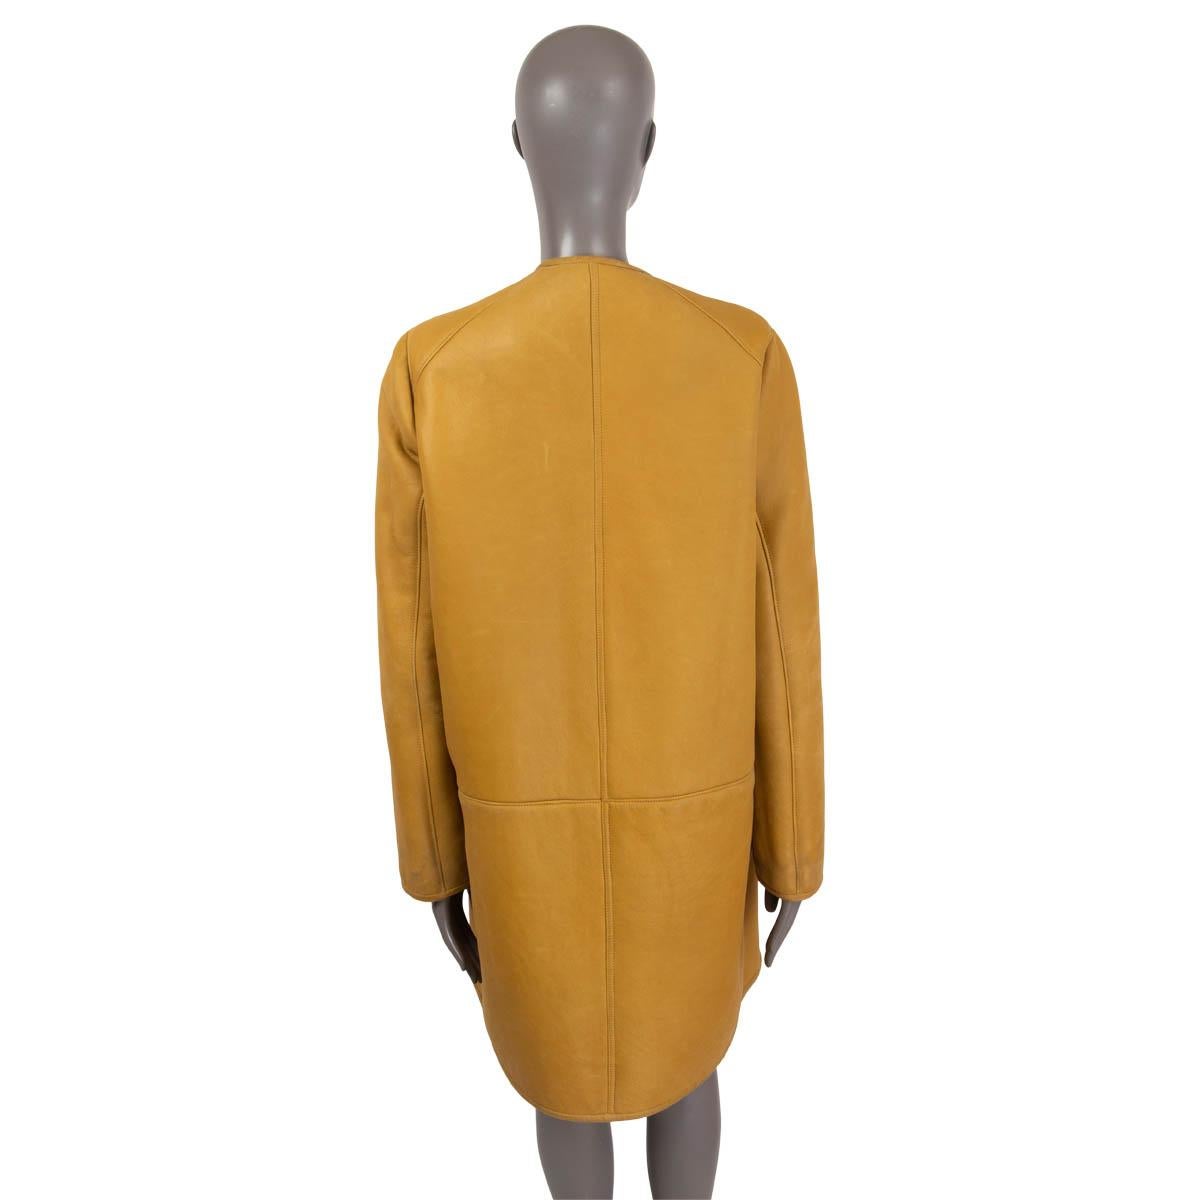 Women's MARNI mustard yellow REVERSIBLE SHEARLING & LEATHER Coat Jacket 46 XL For Sale